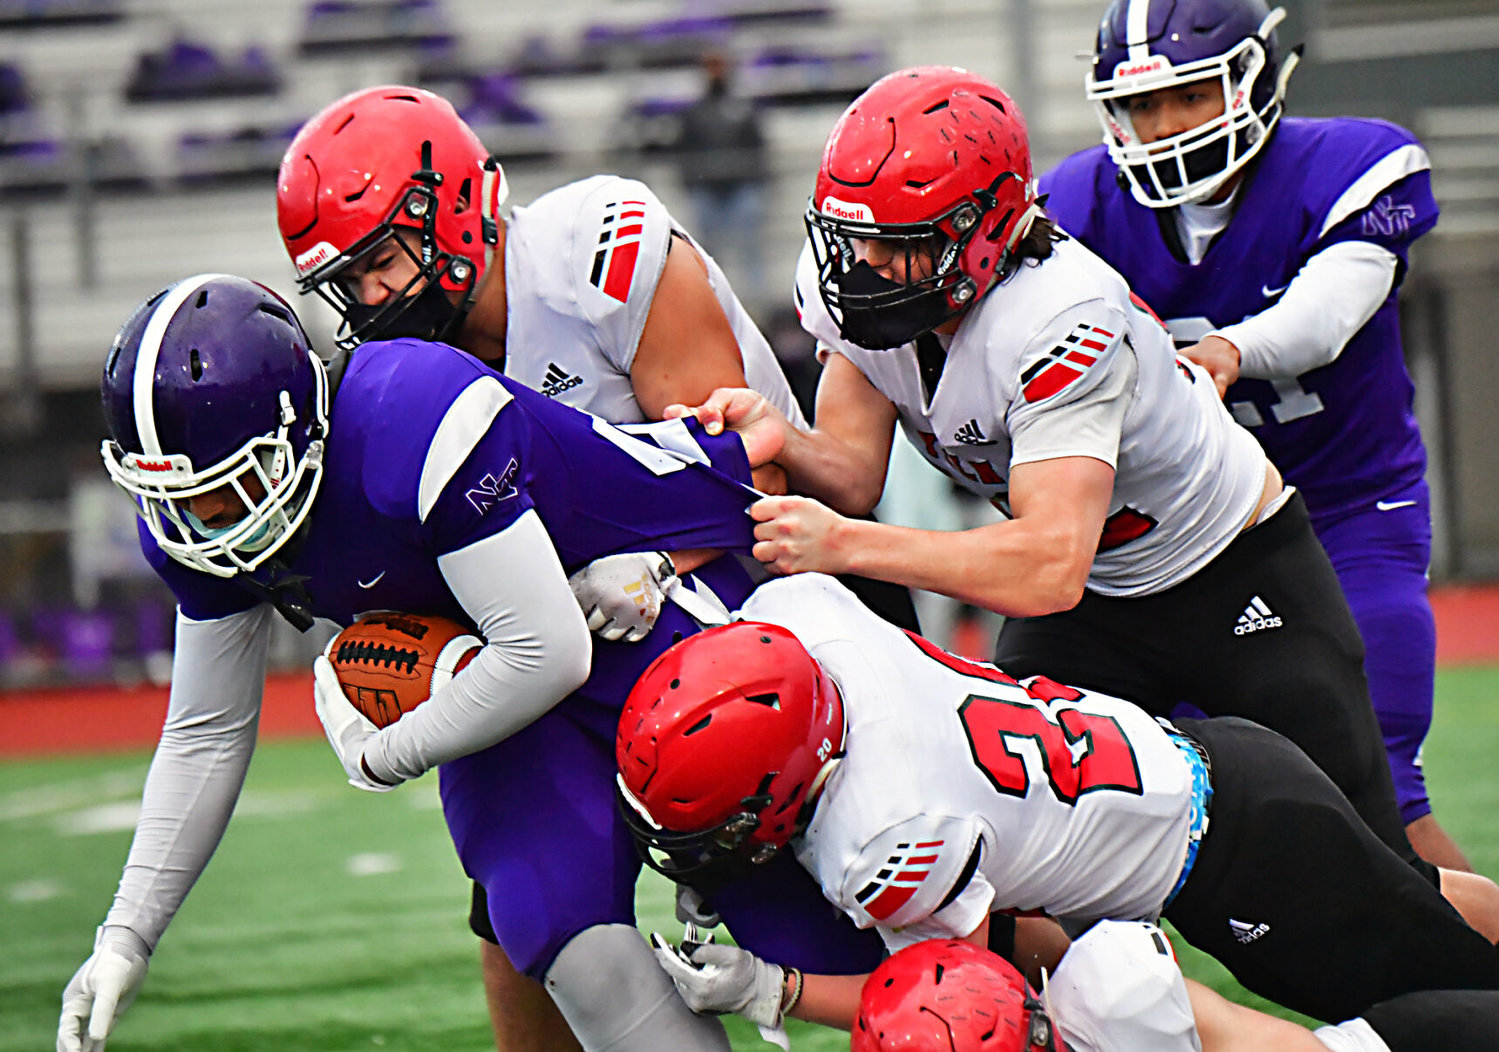 A trio of Yelm High School defenders keep North Thurston High School running back Armani Tonual out of the end zone in the fourth quarter on Friday, March 19, at South Sound Stadium.